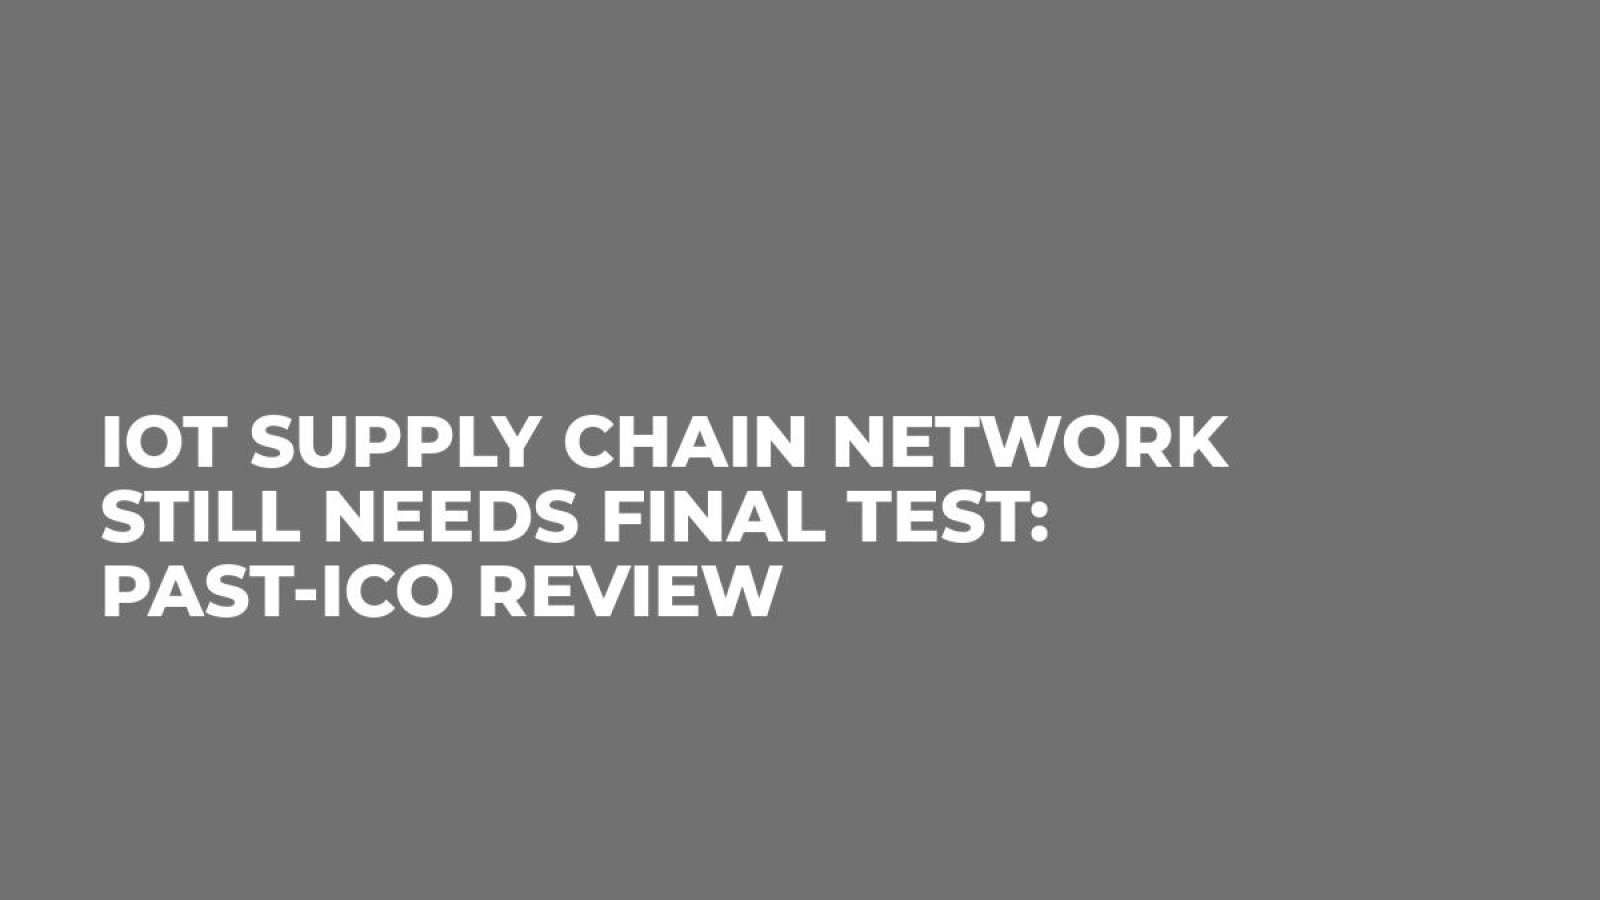 IoT Supply Chain Network Still Needs Final Test: Past-ICO Review